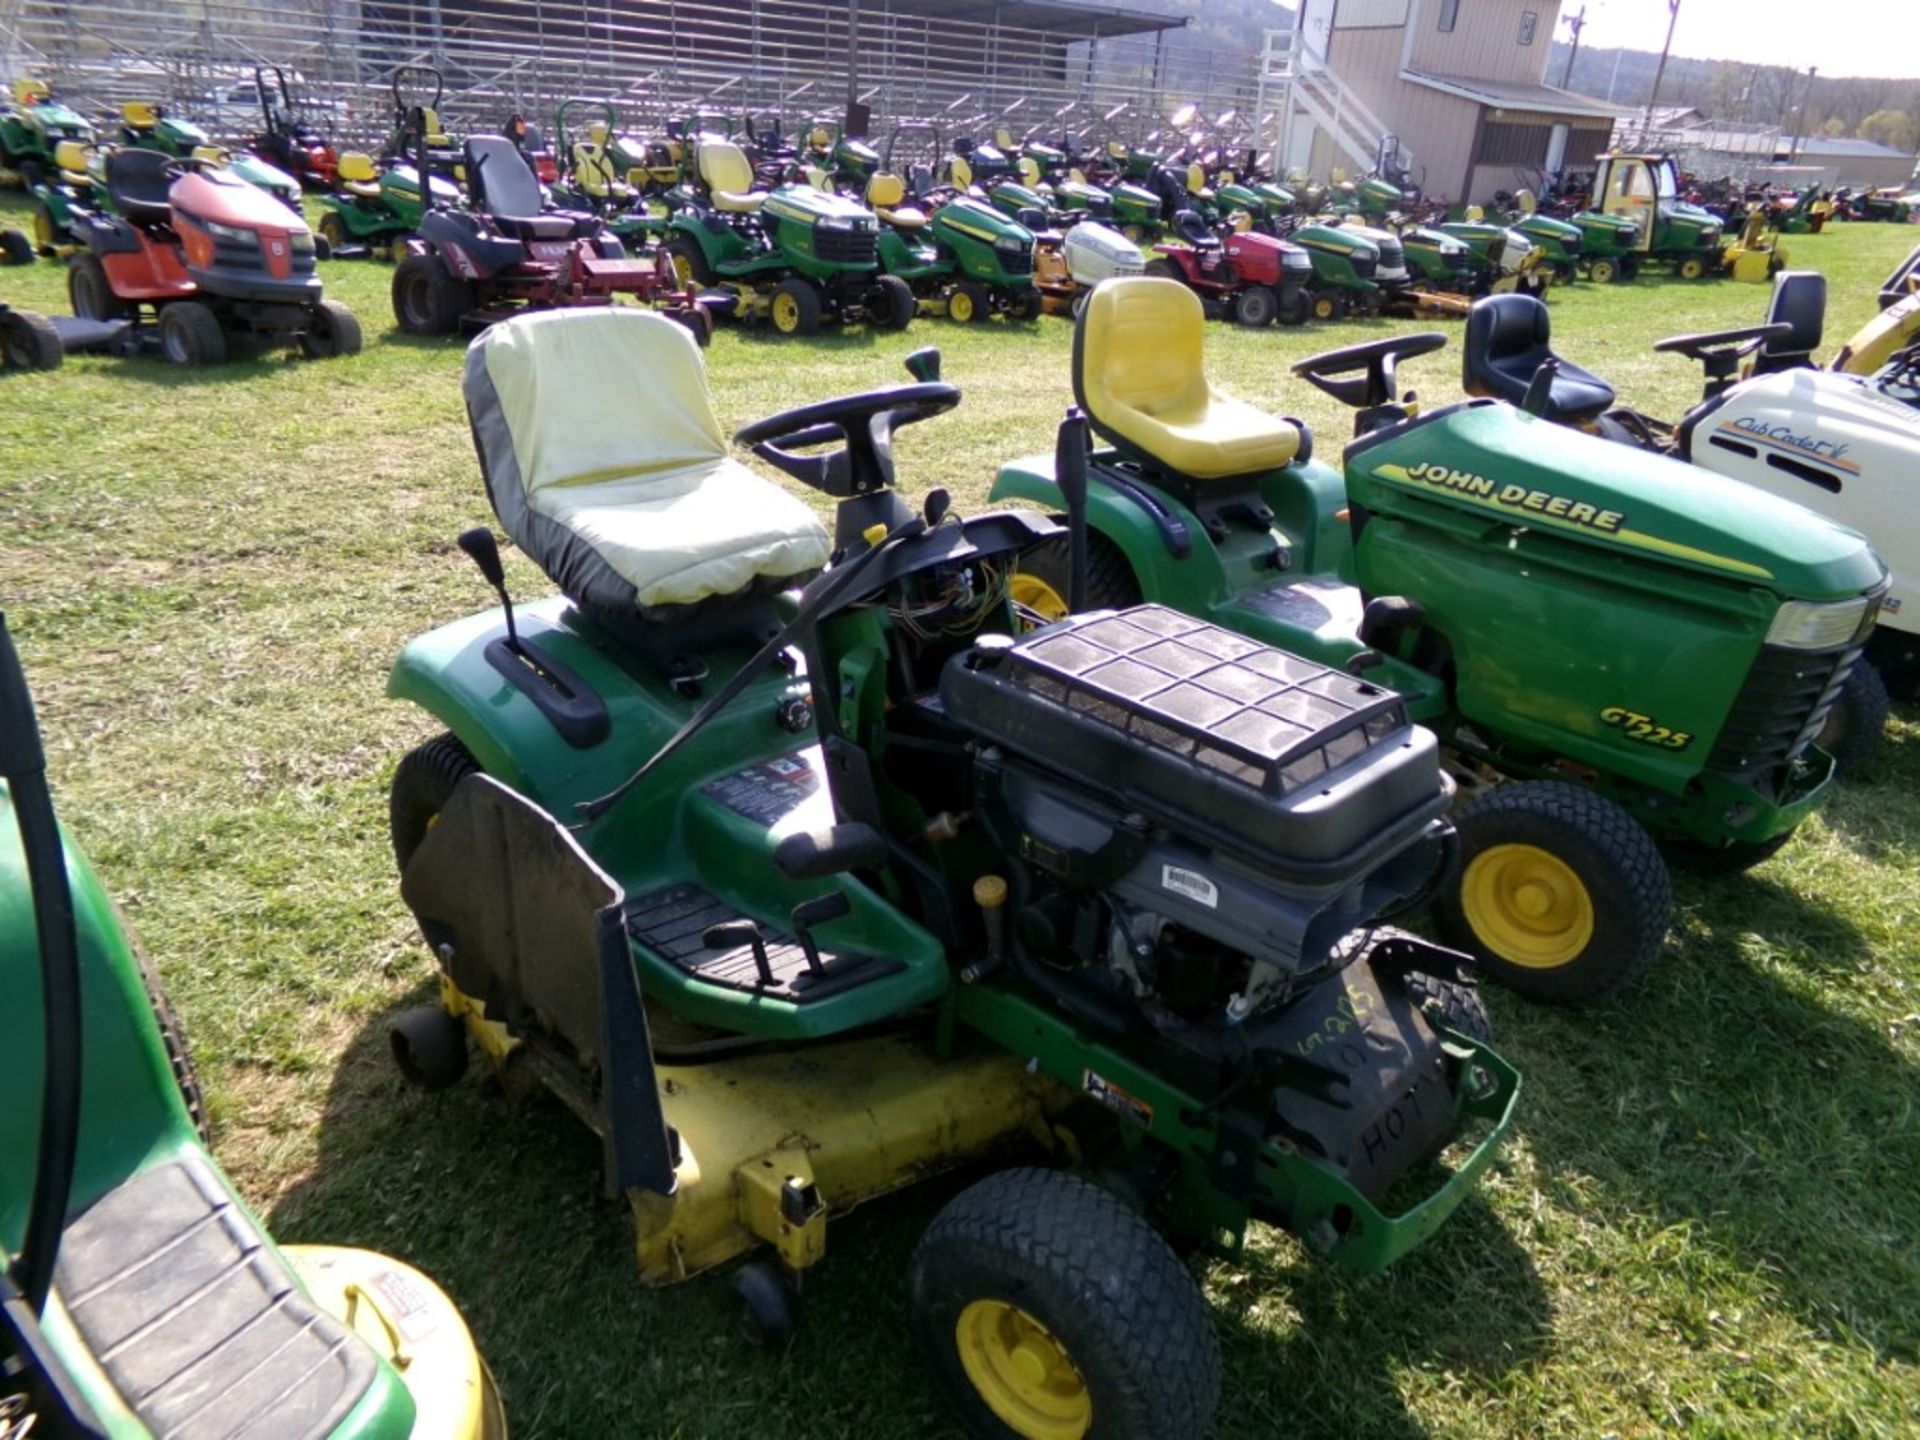 John Deere LX279 Garden Tractor w/ 54'' Deck, NO HOOD, Hyd. Drive, Kawi 17Hp Water Cooled Eng., S/ - Image 2 of 2